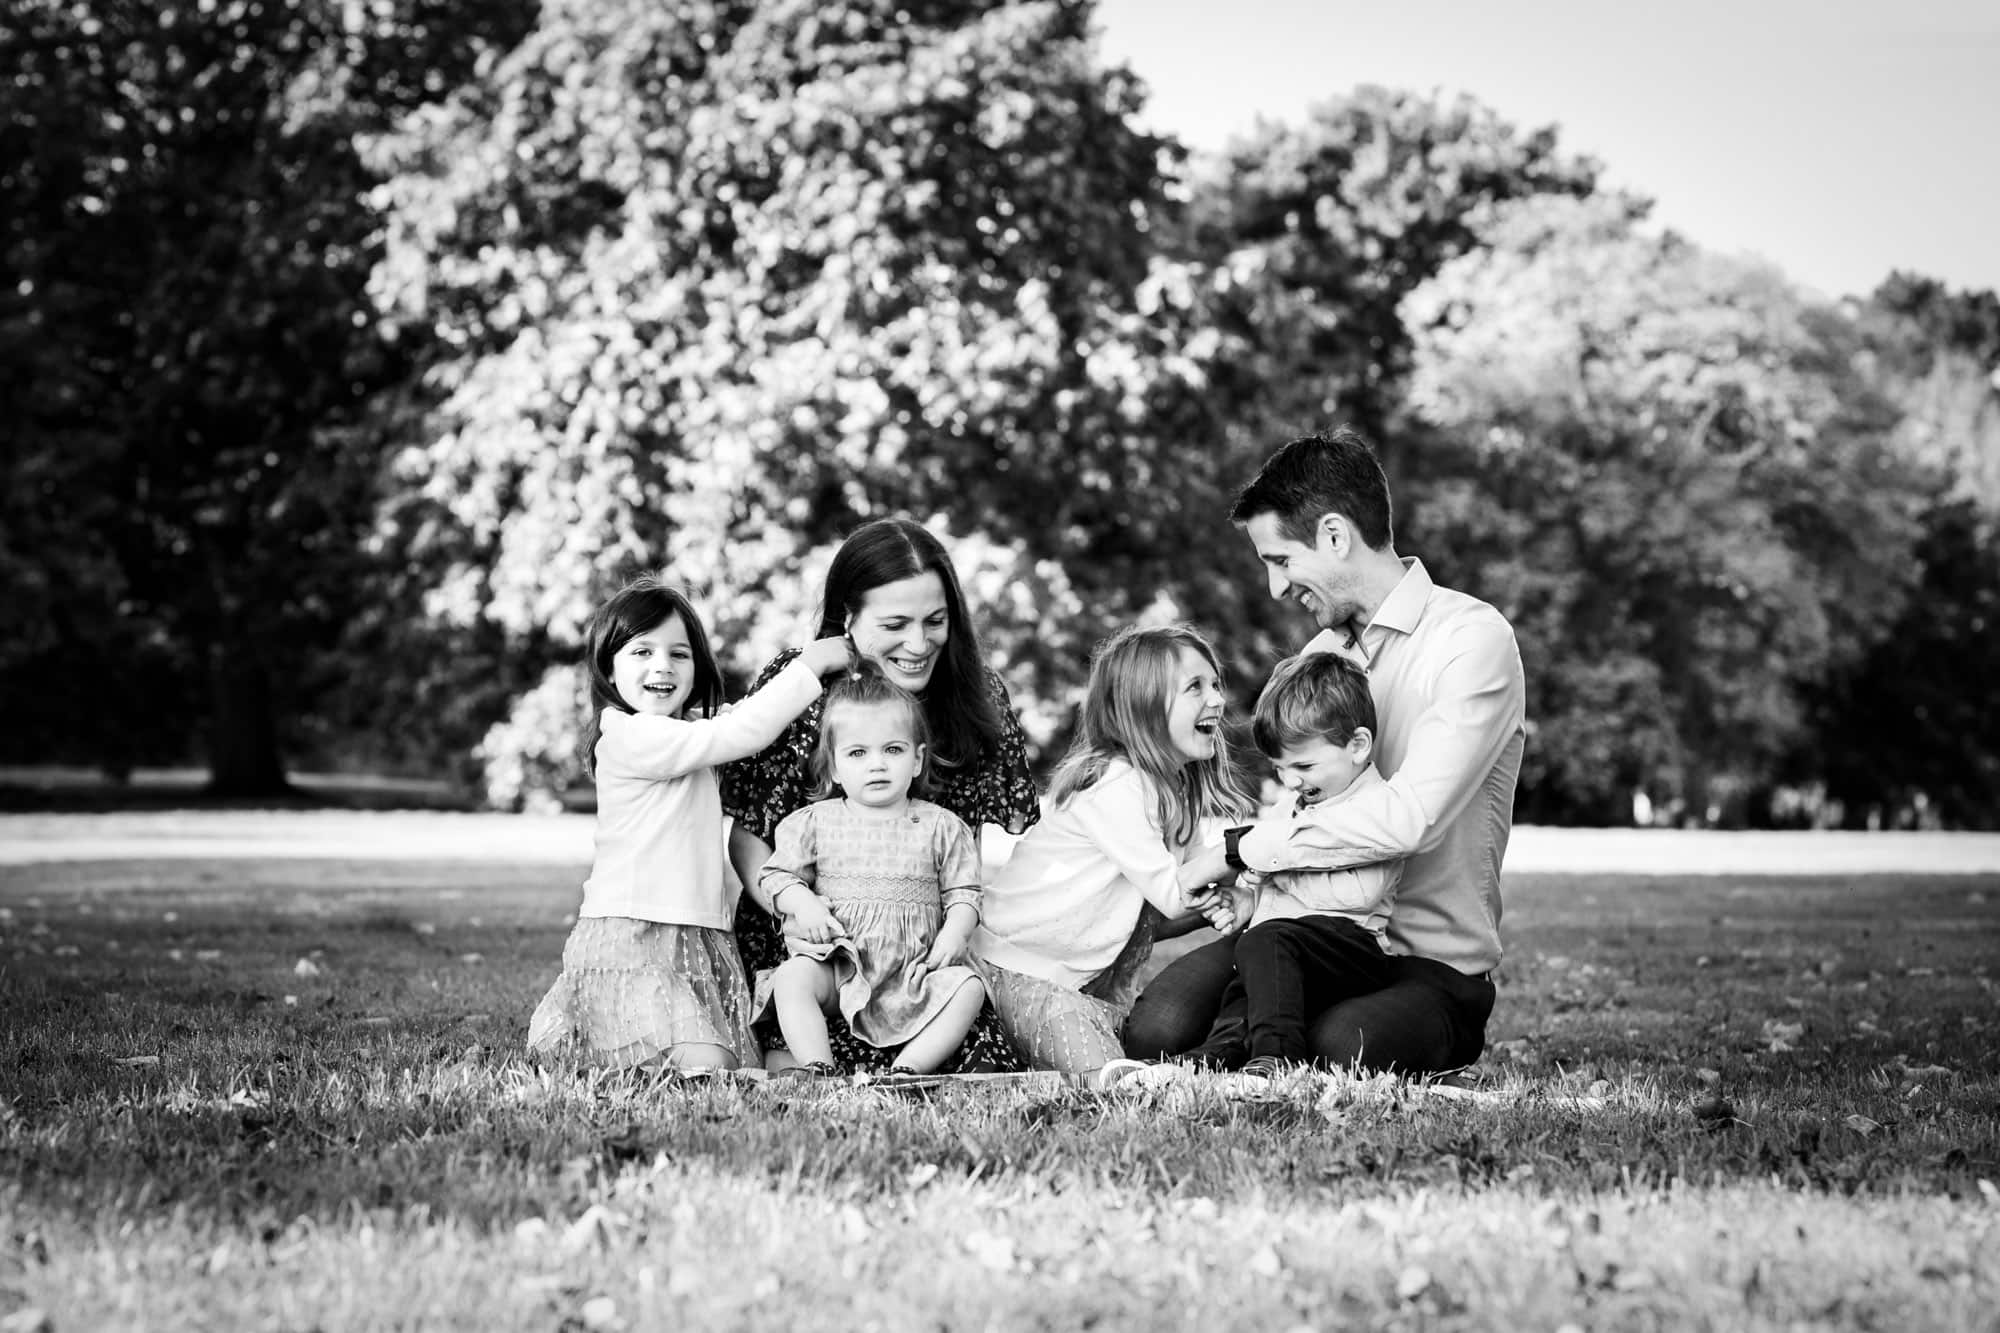 Family laughing and smiling in black and white outdoor photo taken by Beckenham family photographer